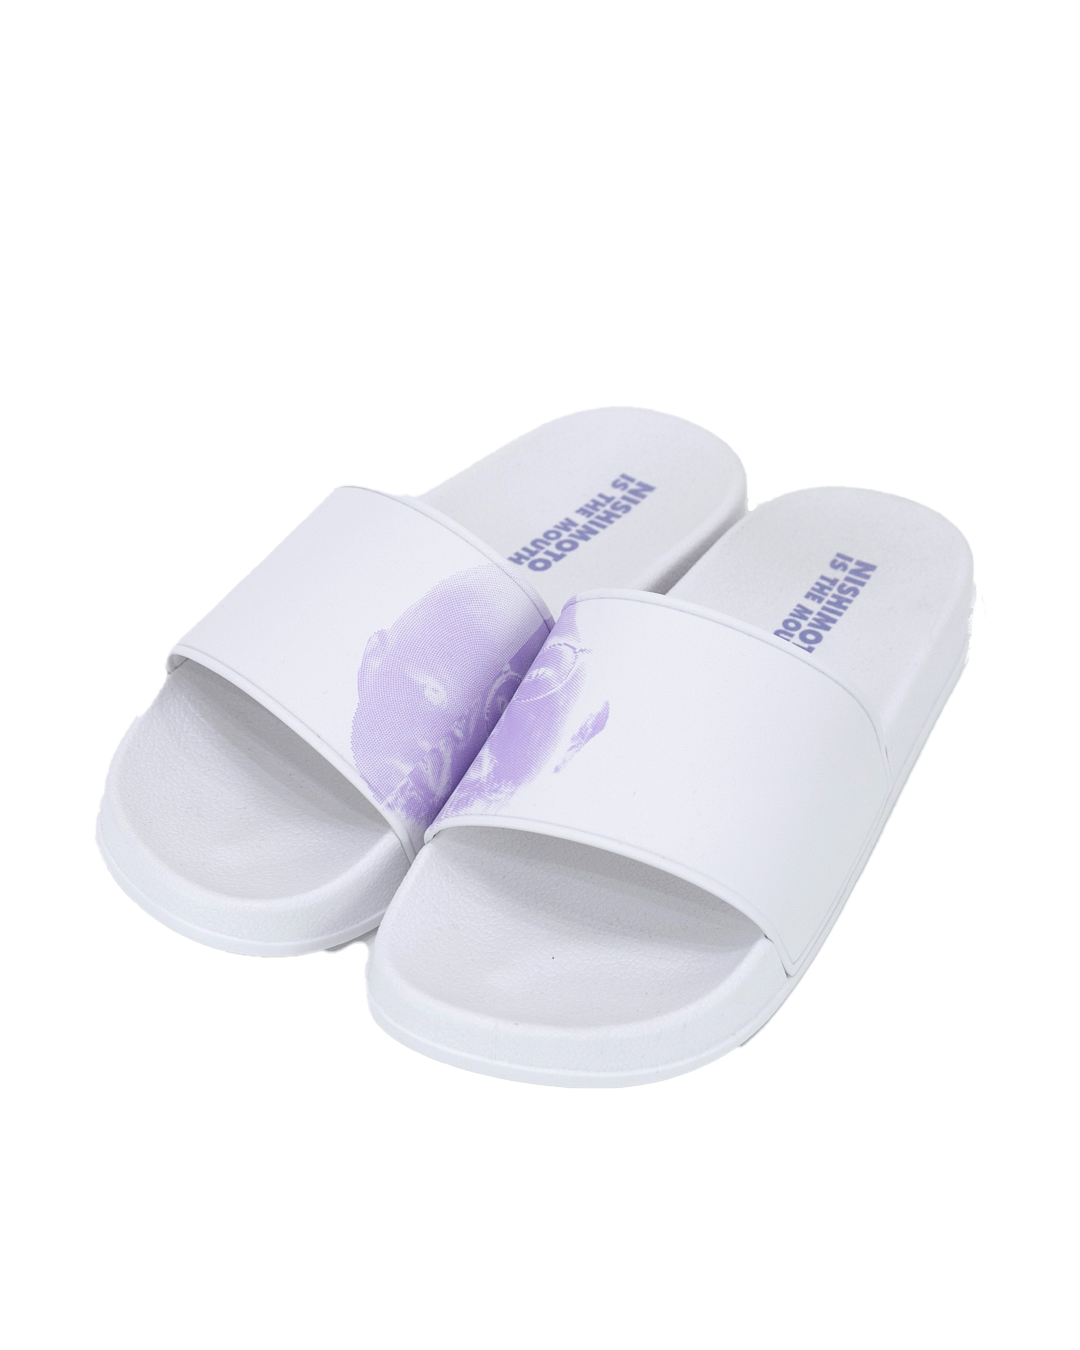 NISHIMOTO IS THE MOUTH 2 FACE SHOWER SANDALS